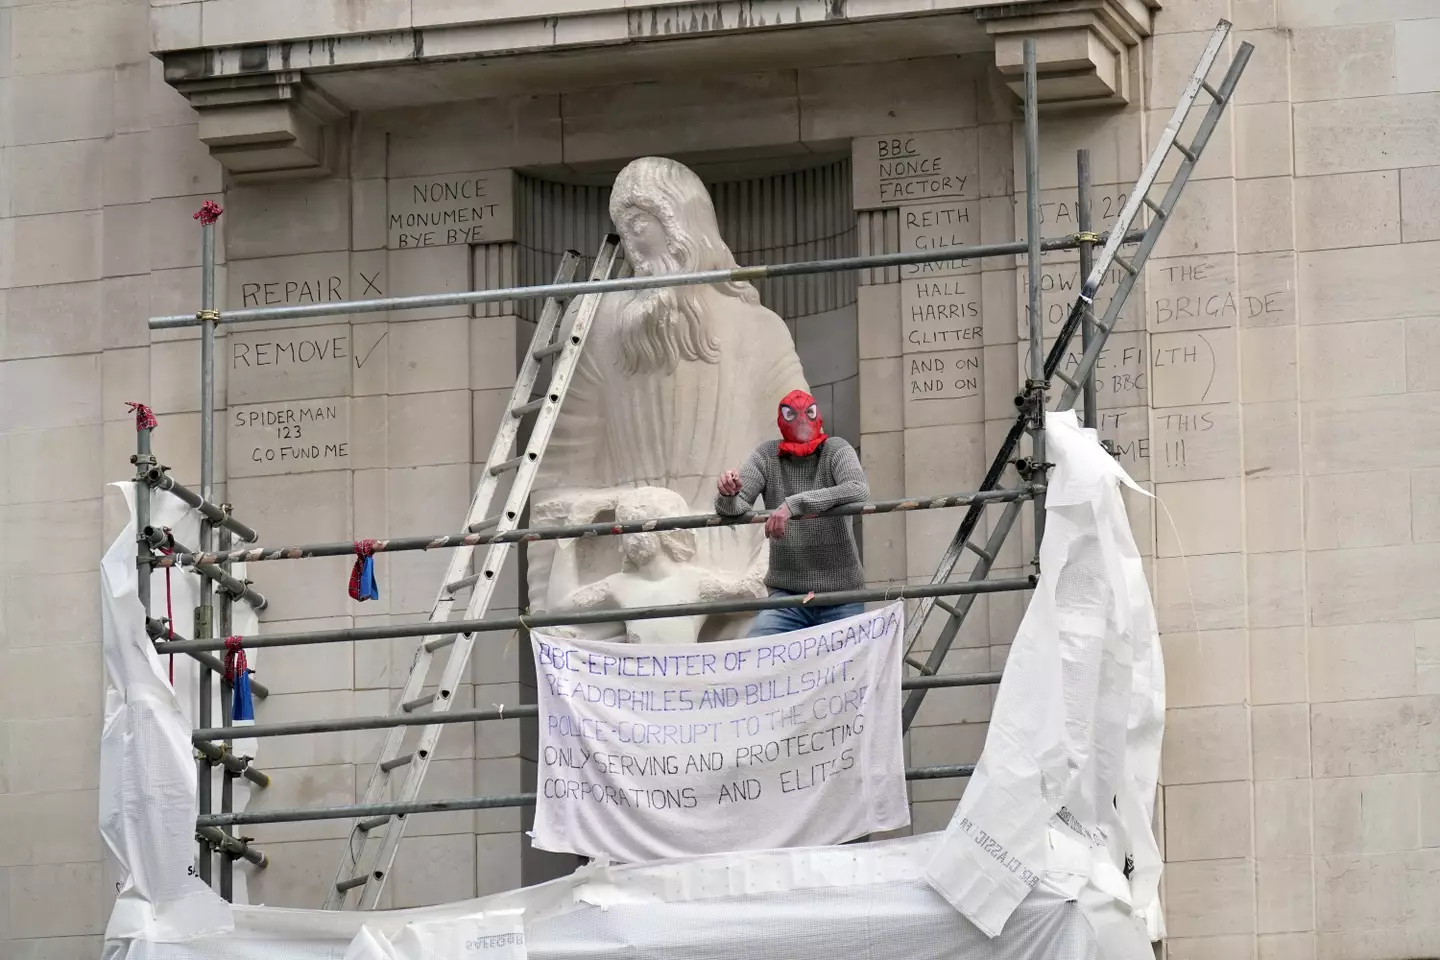 This is the second time that the statue has been attacked since it was installed.